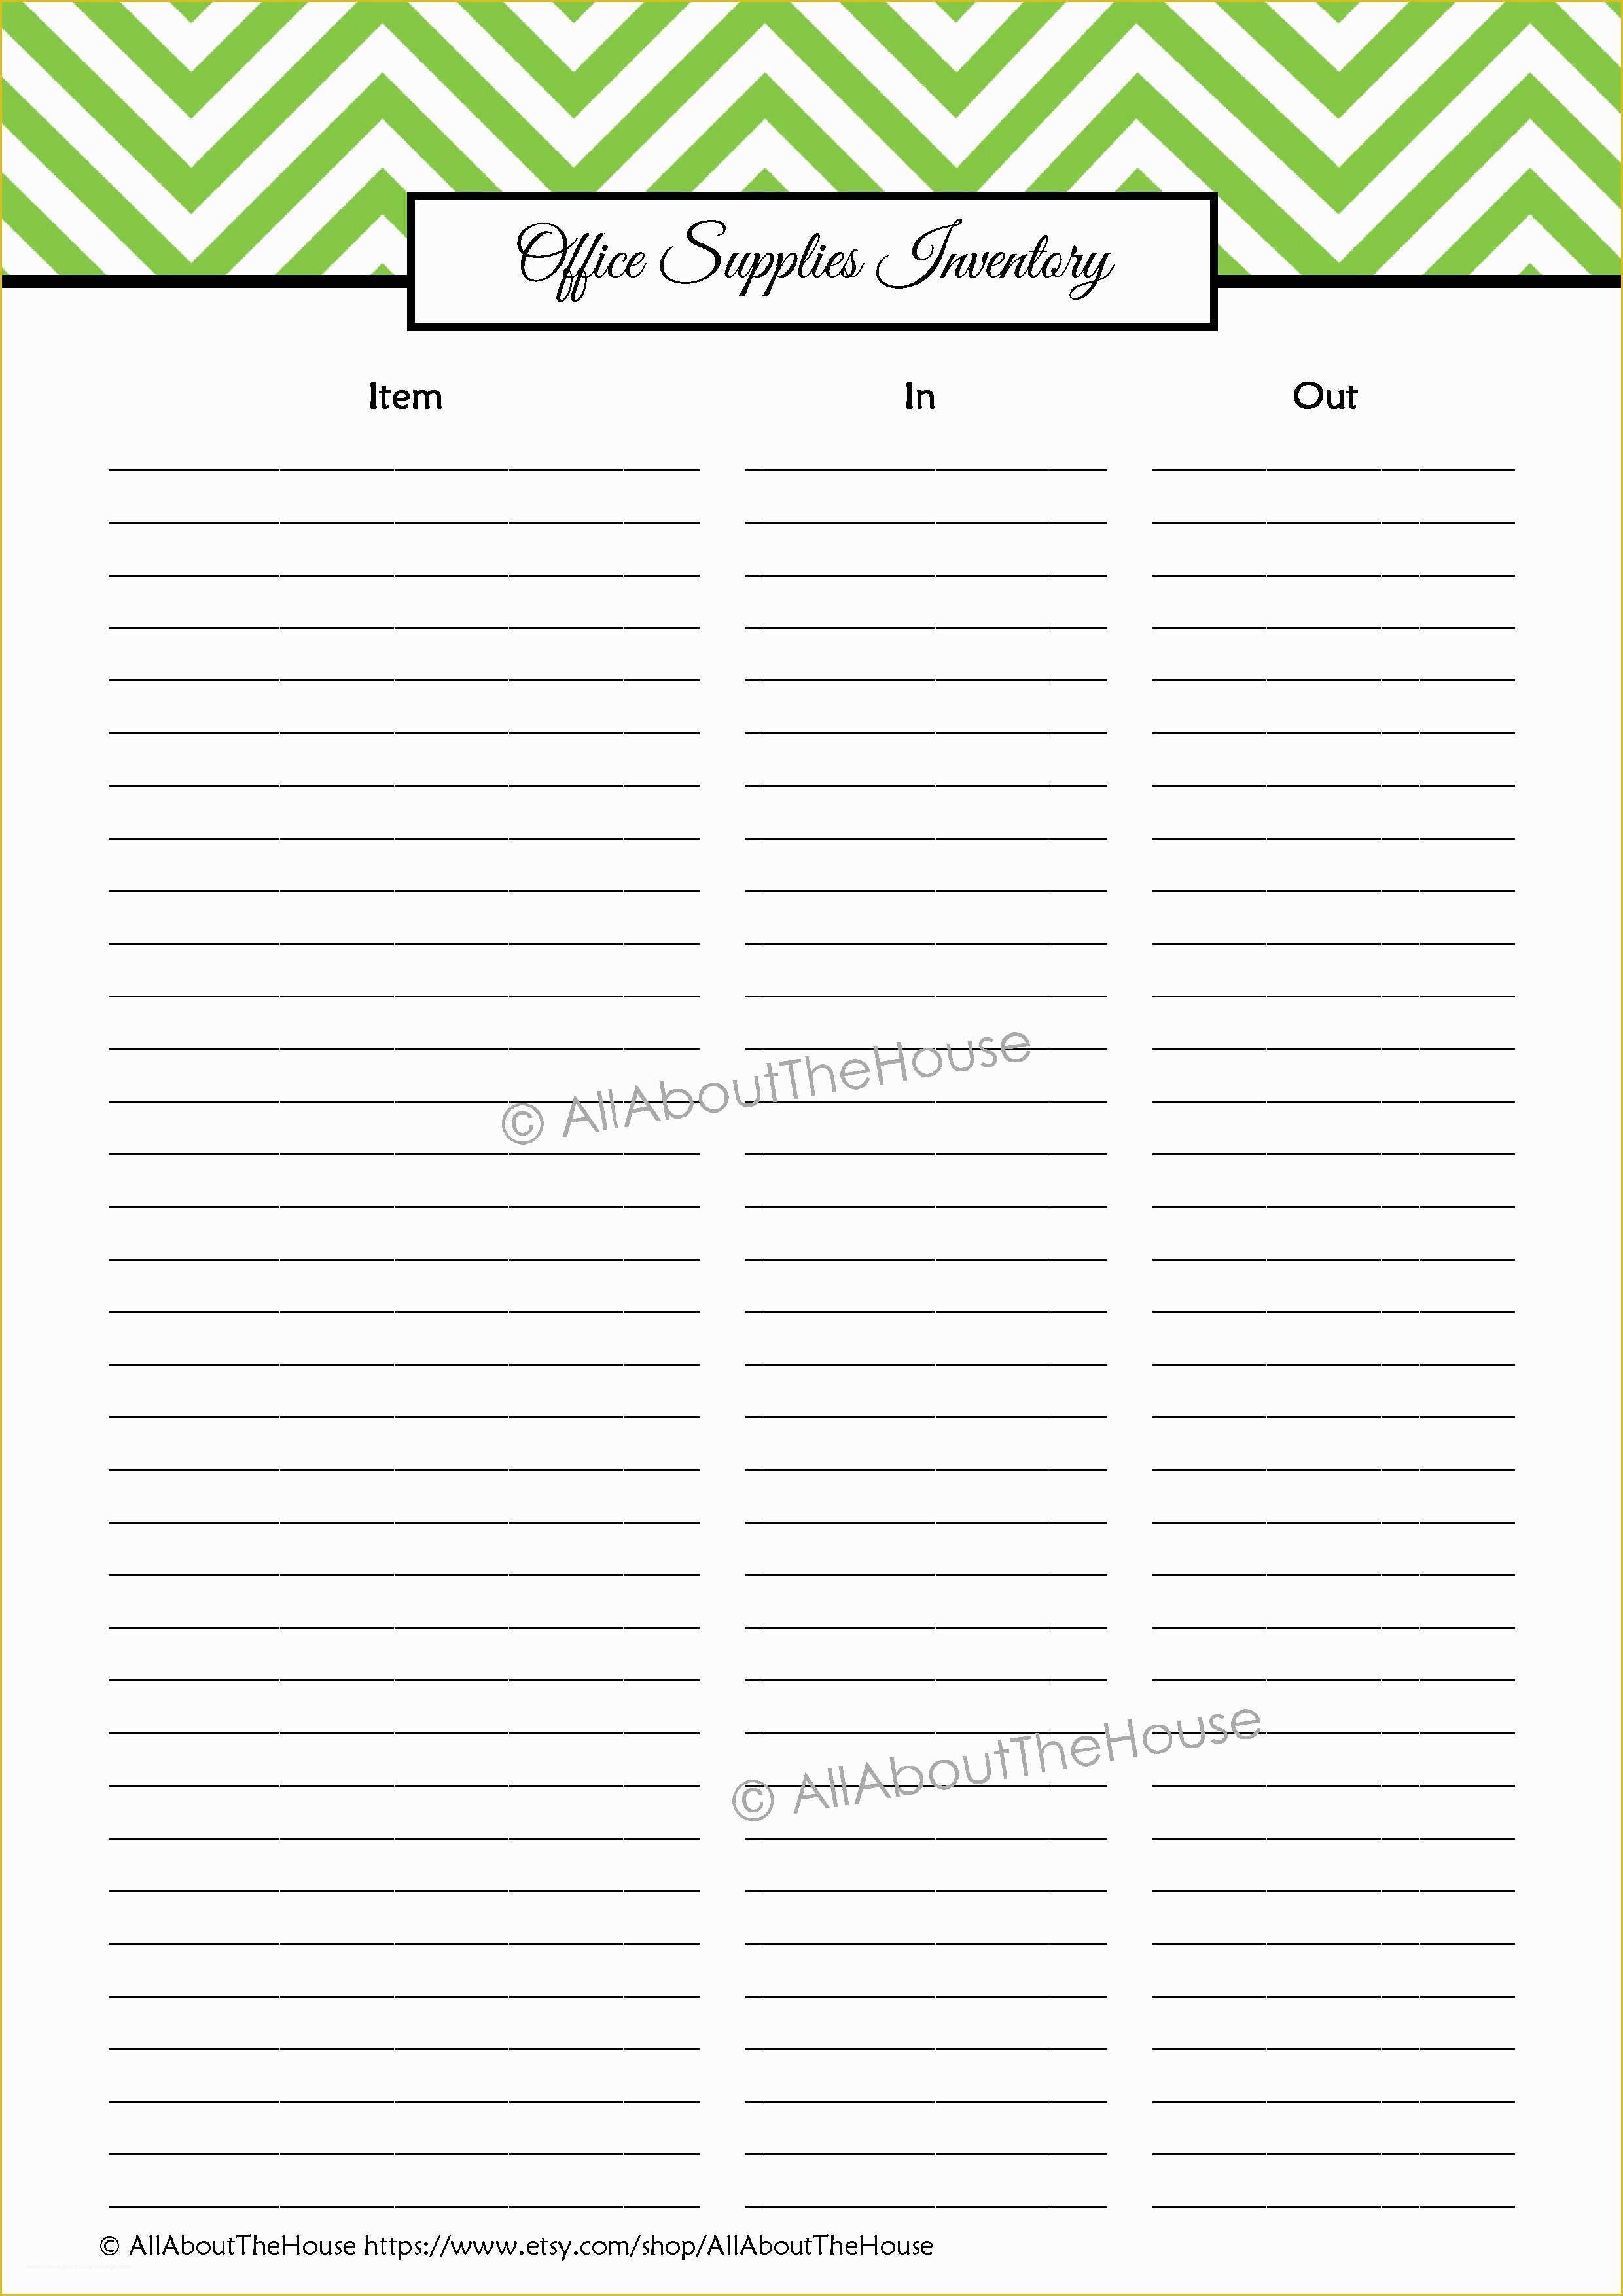 Free Office Supply List Template Of Printable Fice Supply List Portablegasgrillweber